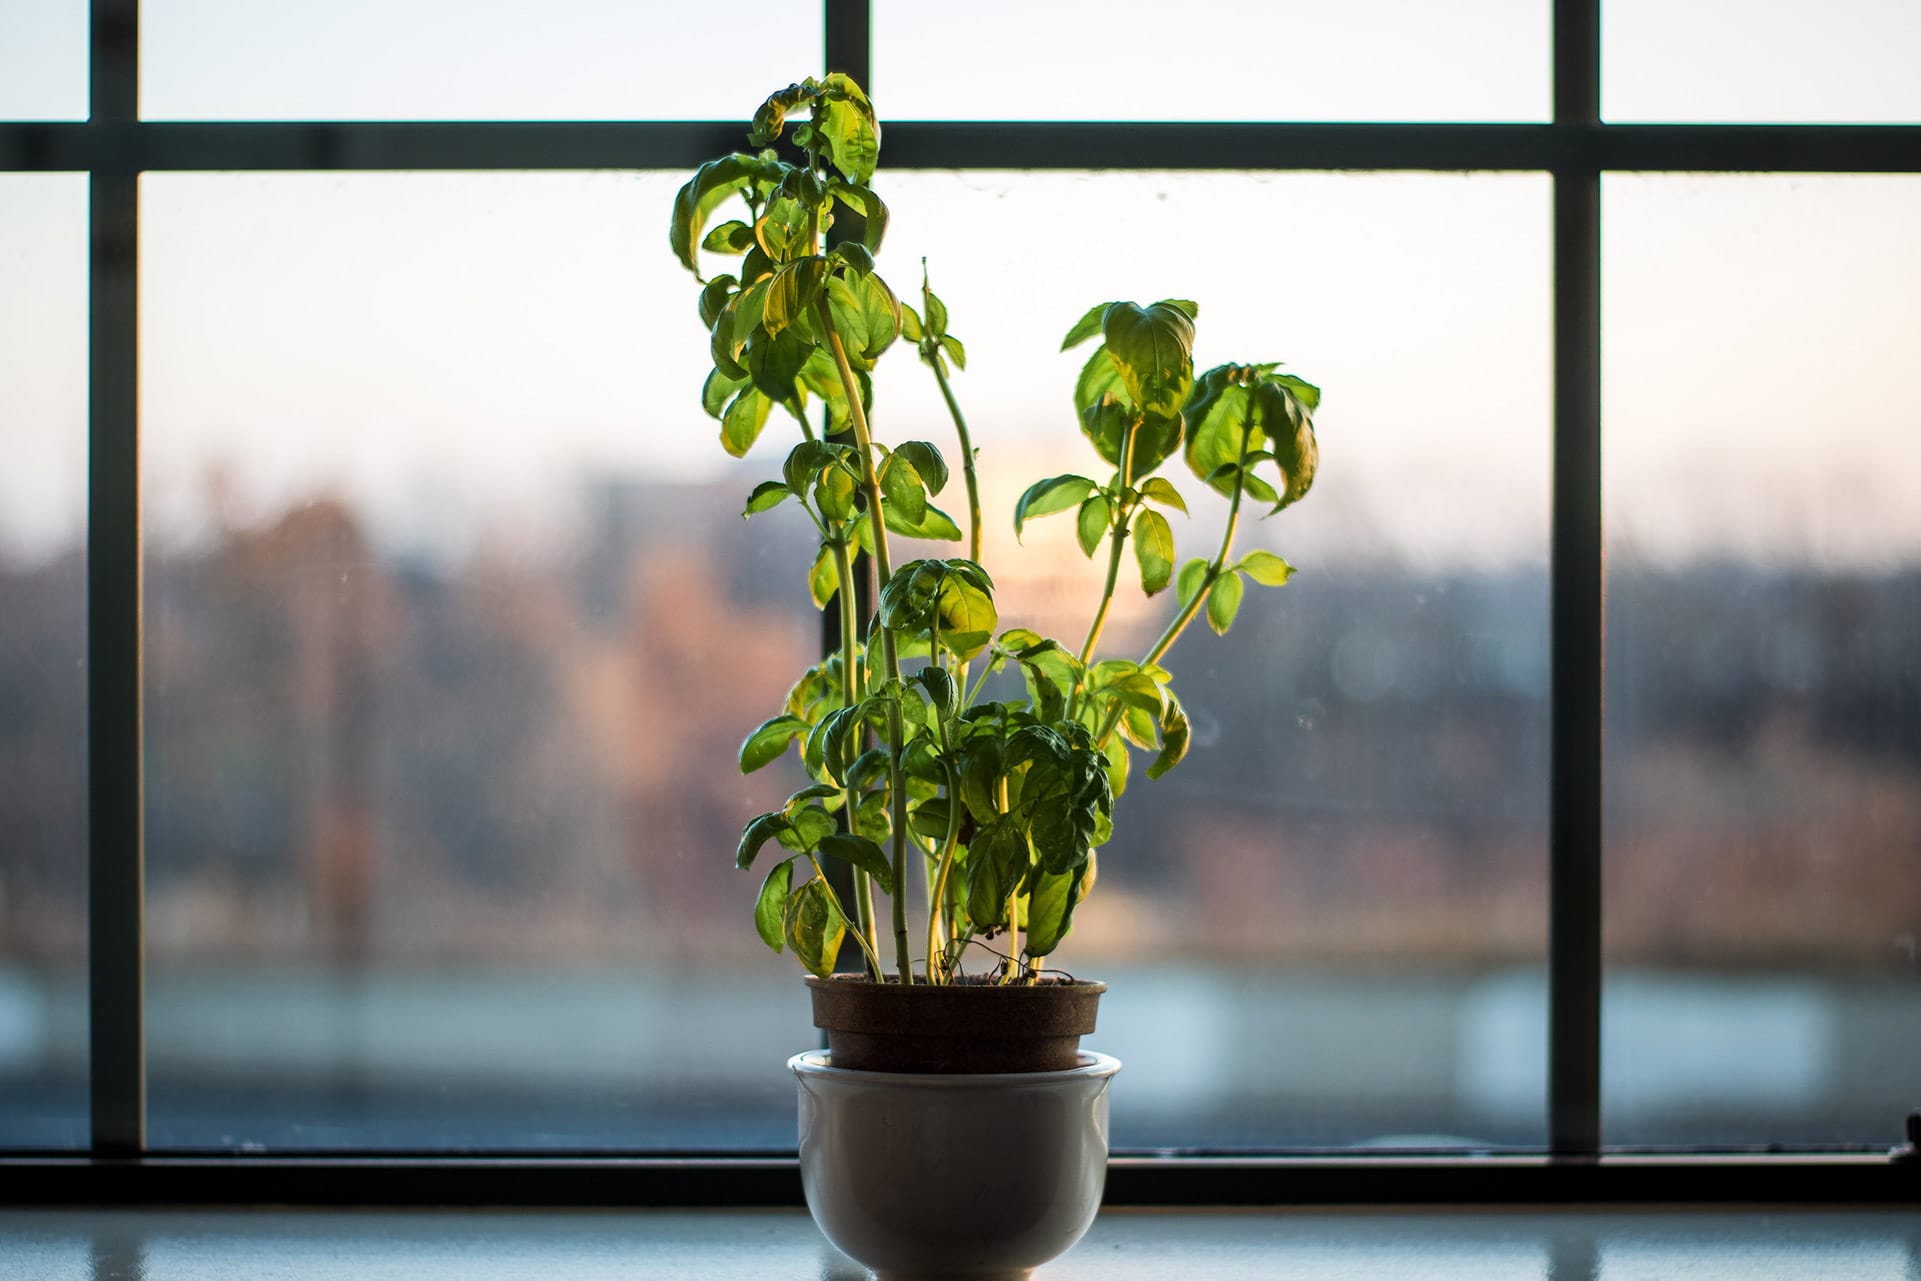 A potted basil plant basks in the gentle glow of natural light by a window, offering a serene blend of indoor greenery against the backdrop of a tranquil outdoor view, perfect for any witchy